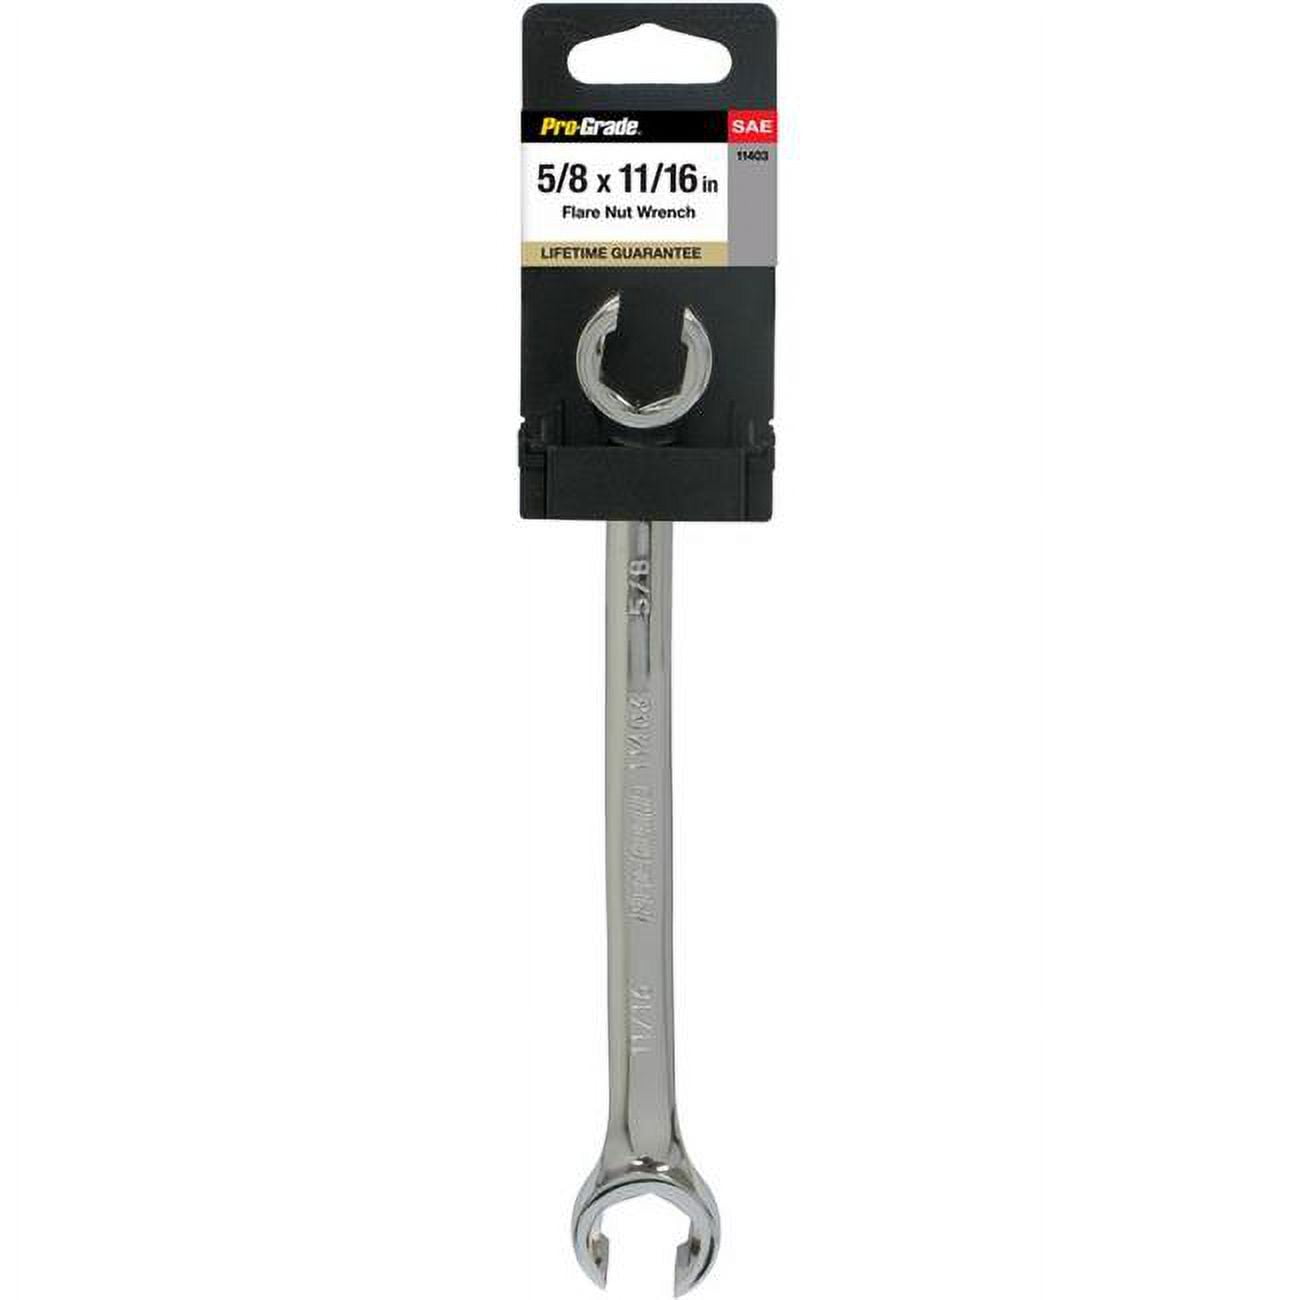 Picture of Pro-Grade 11403 0.62 x 0.06 in. Flare Nut Wrench